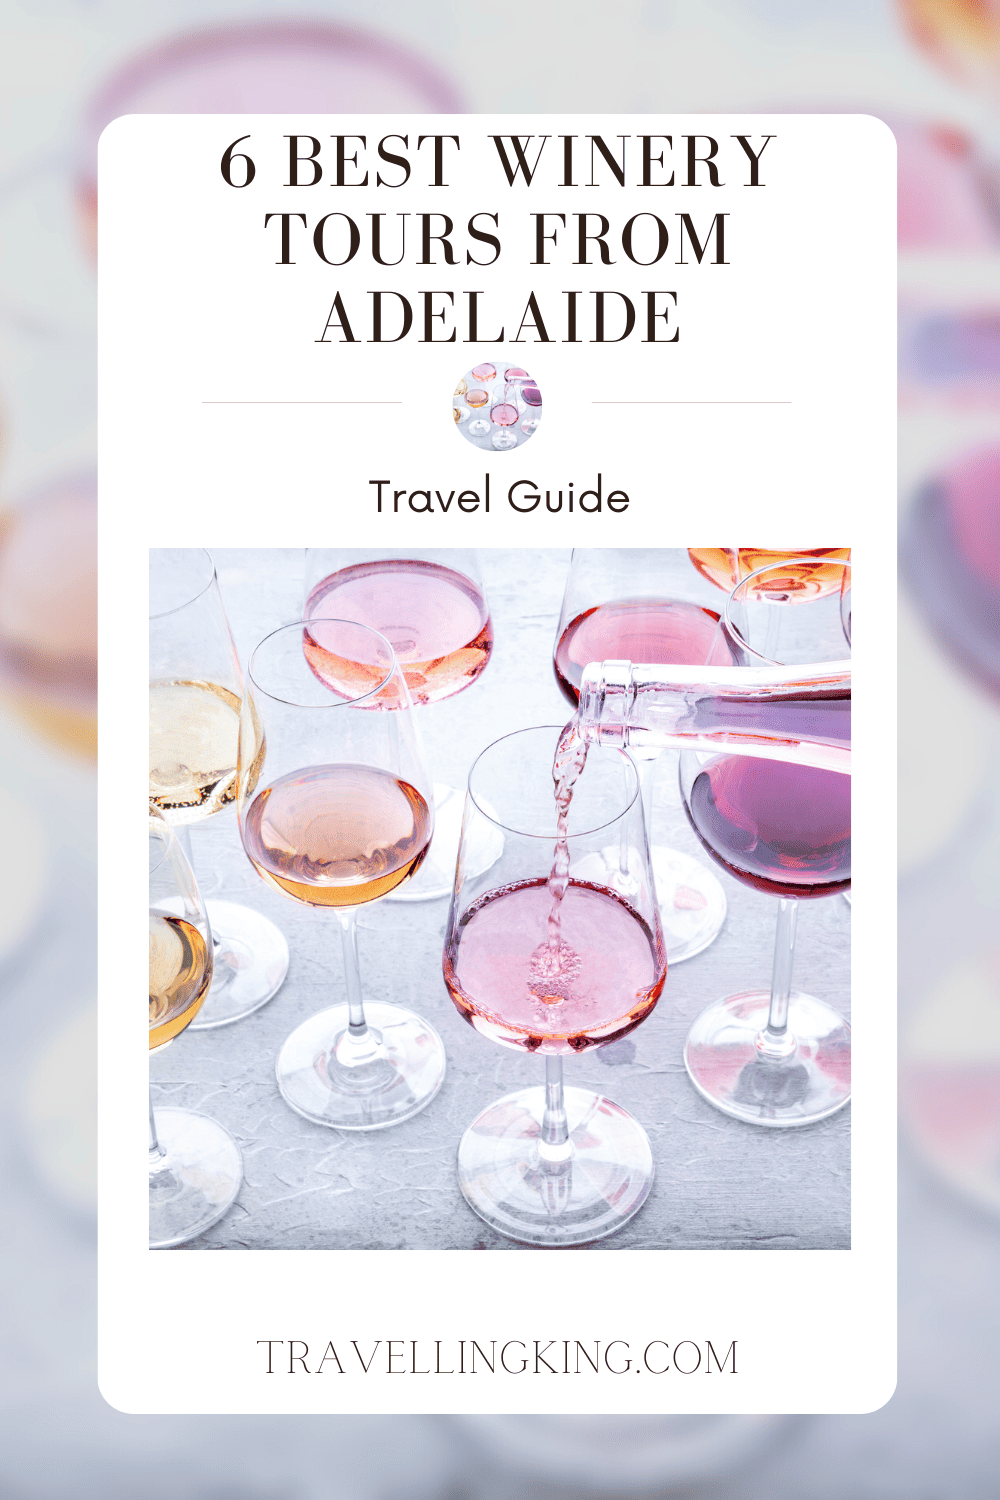 6 Best Winery Tours from adelaide